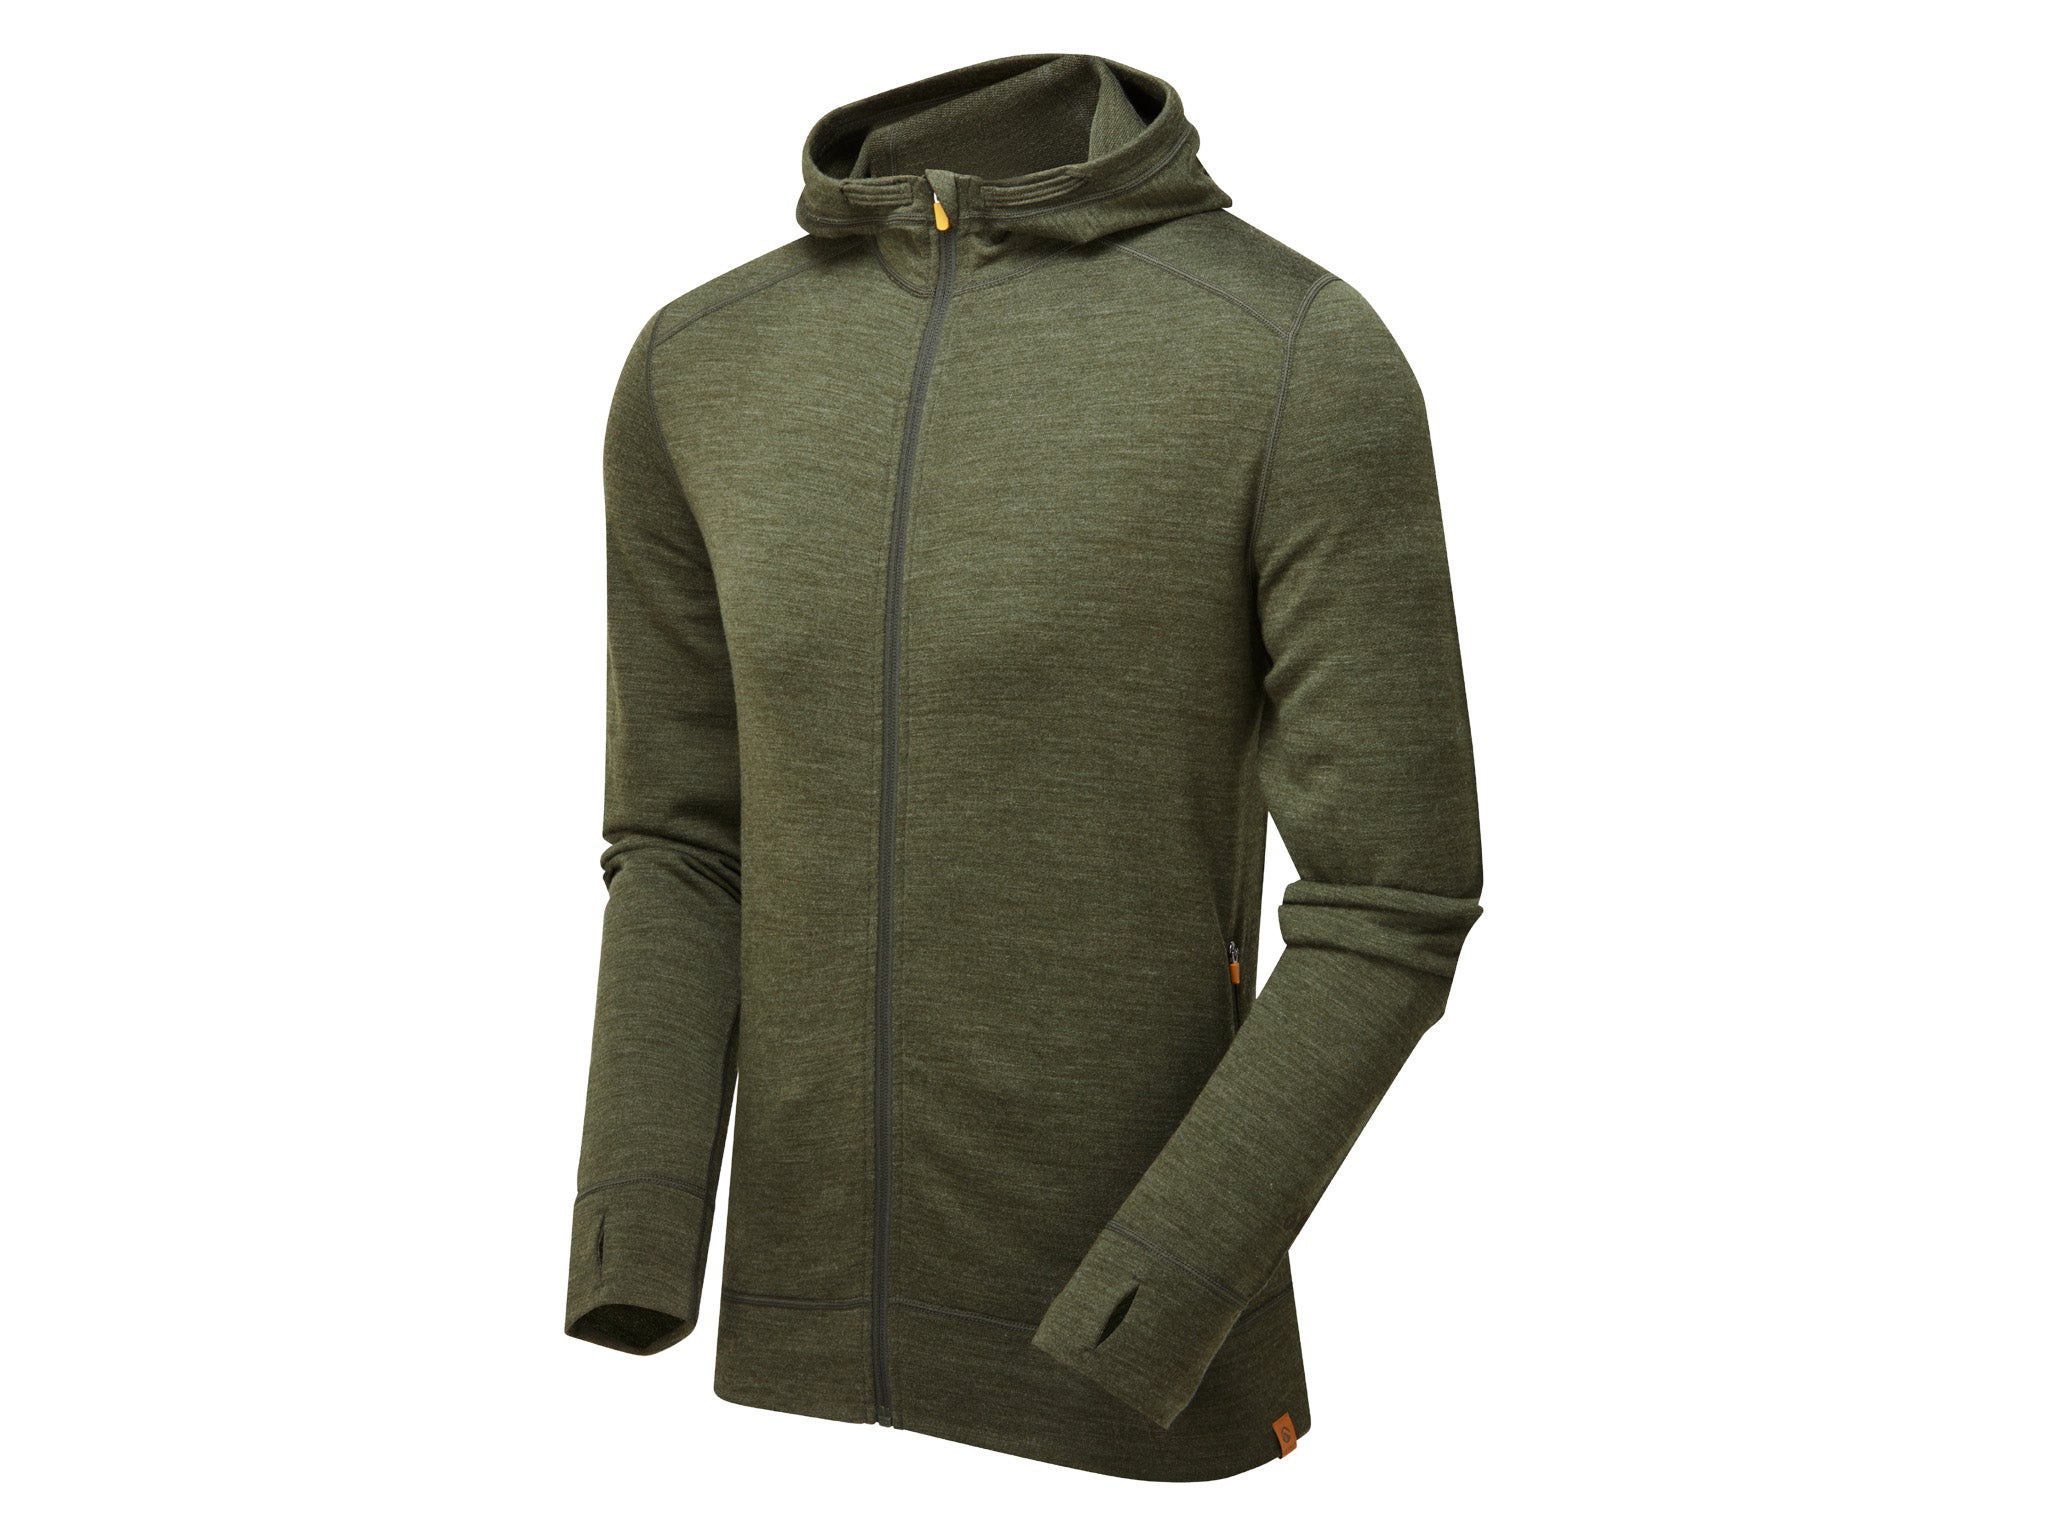 Keela-Indybest-baselayer-review